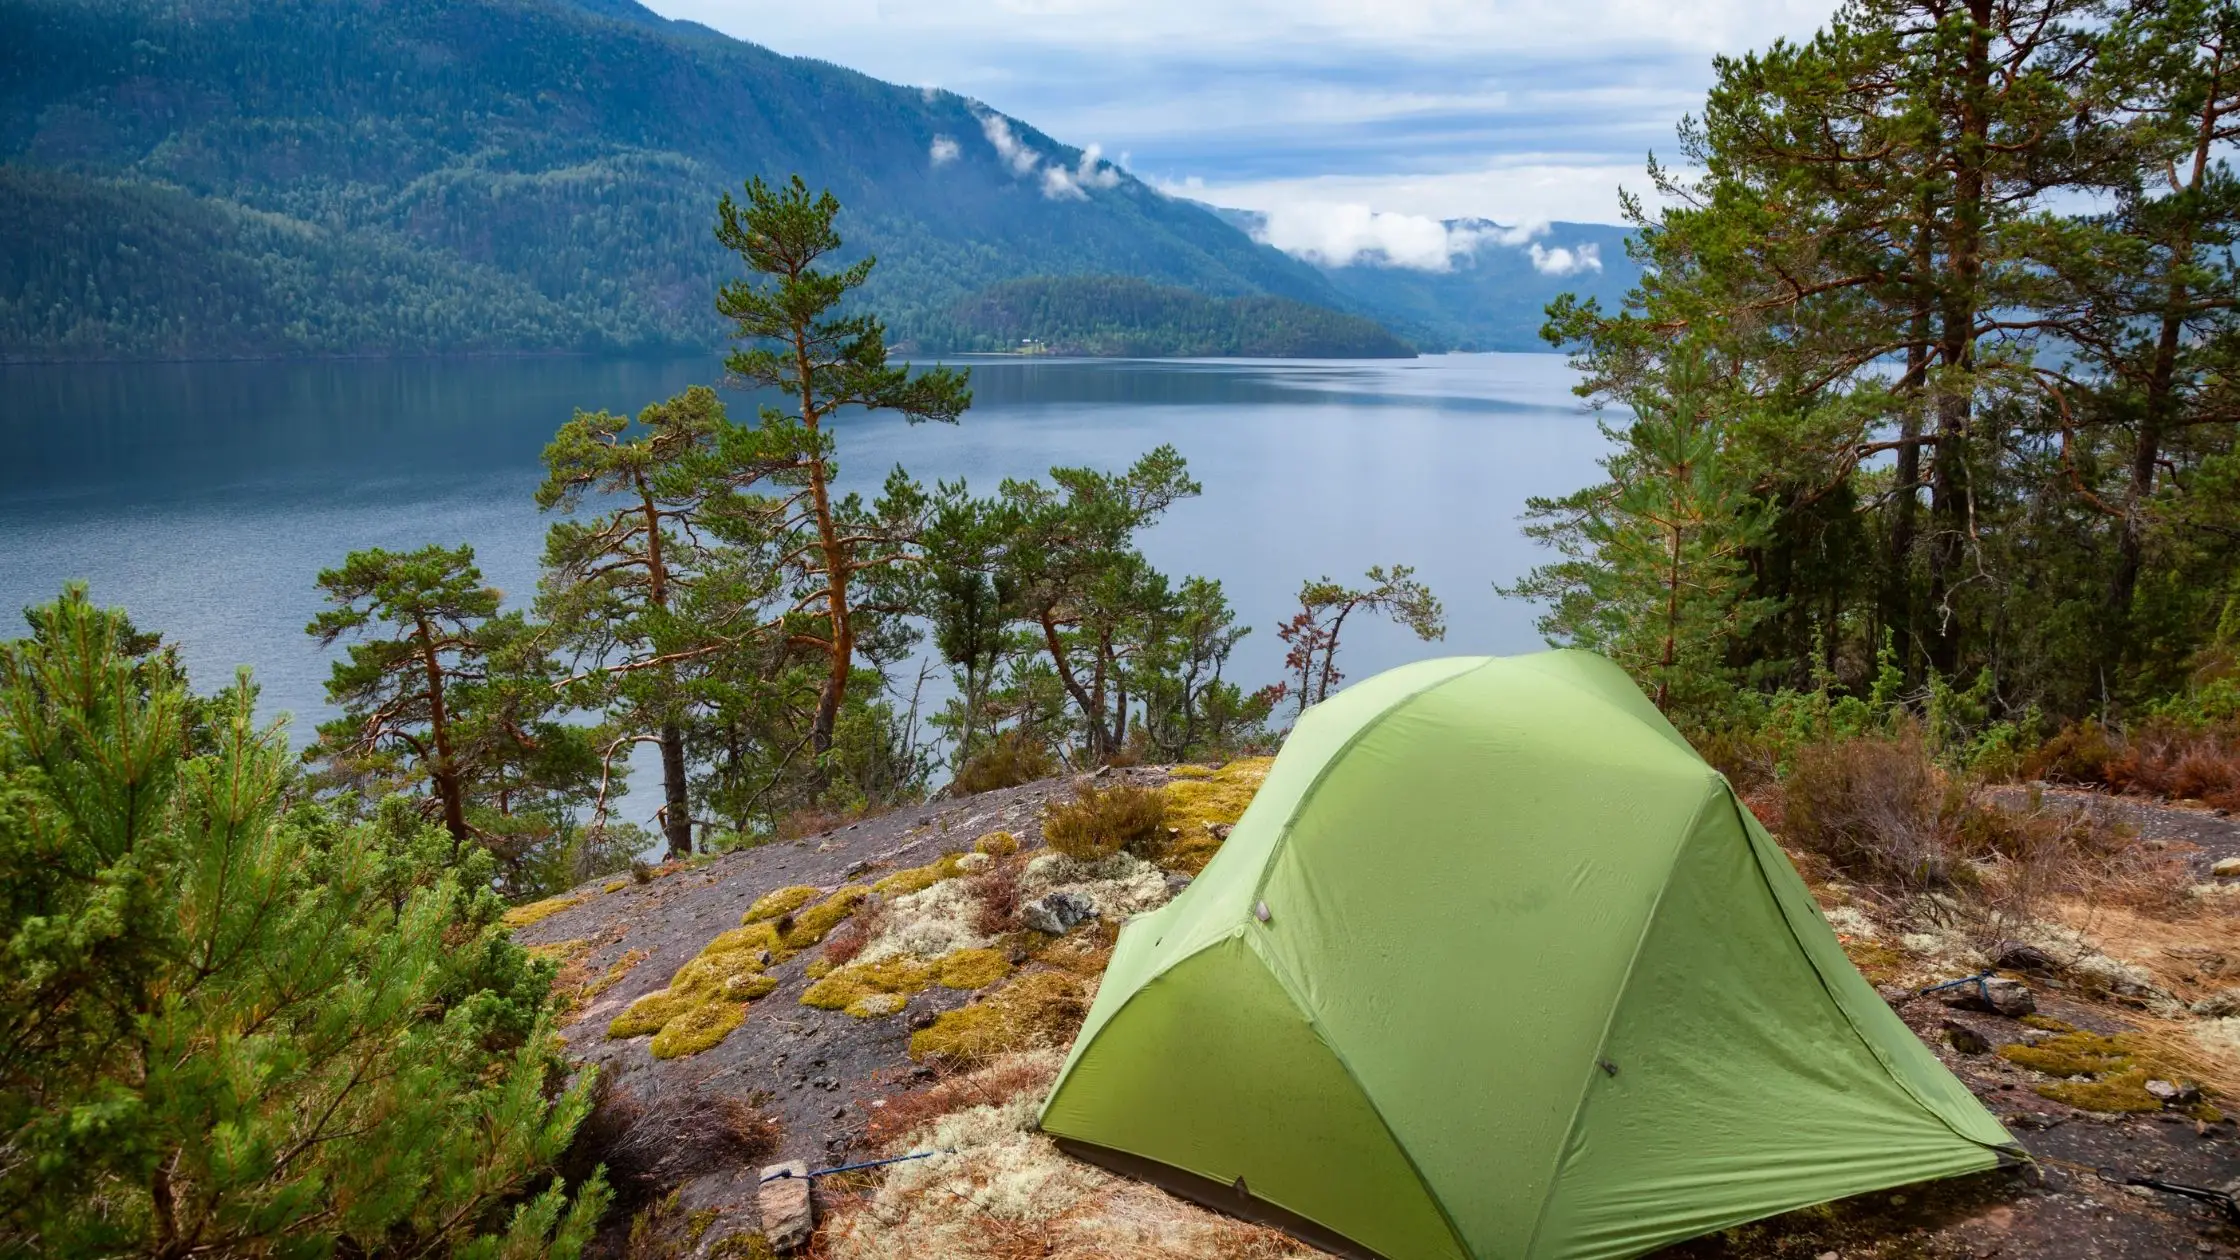 What Are the Best Tents For Camping?